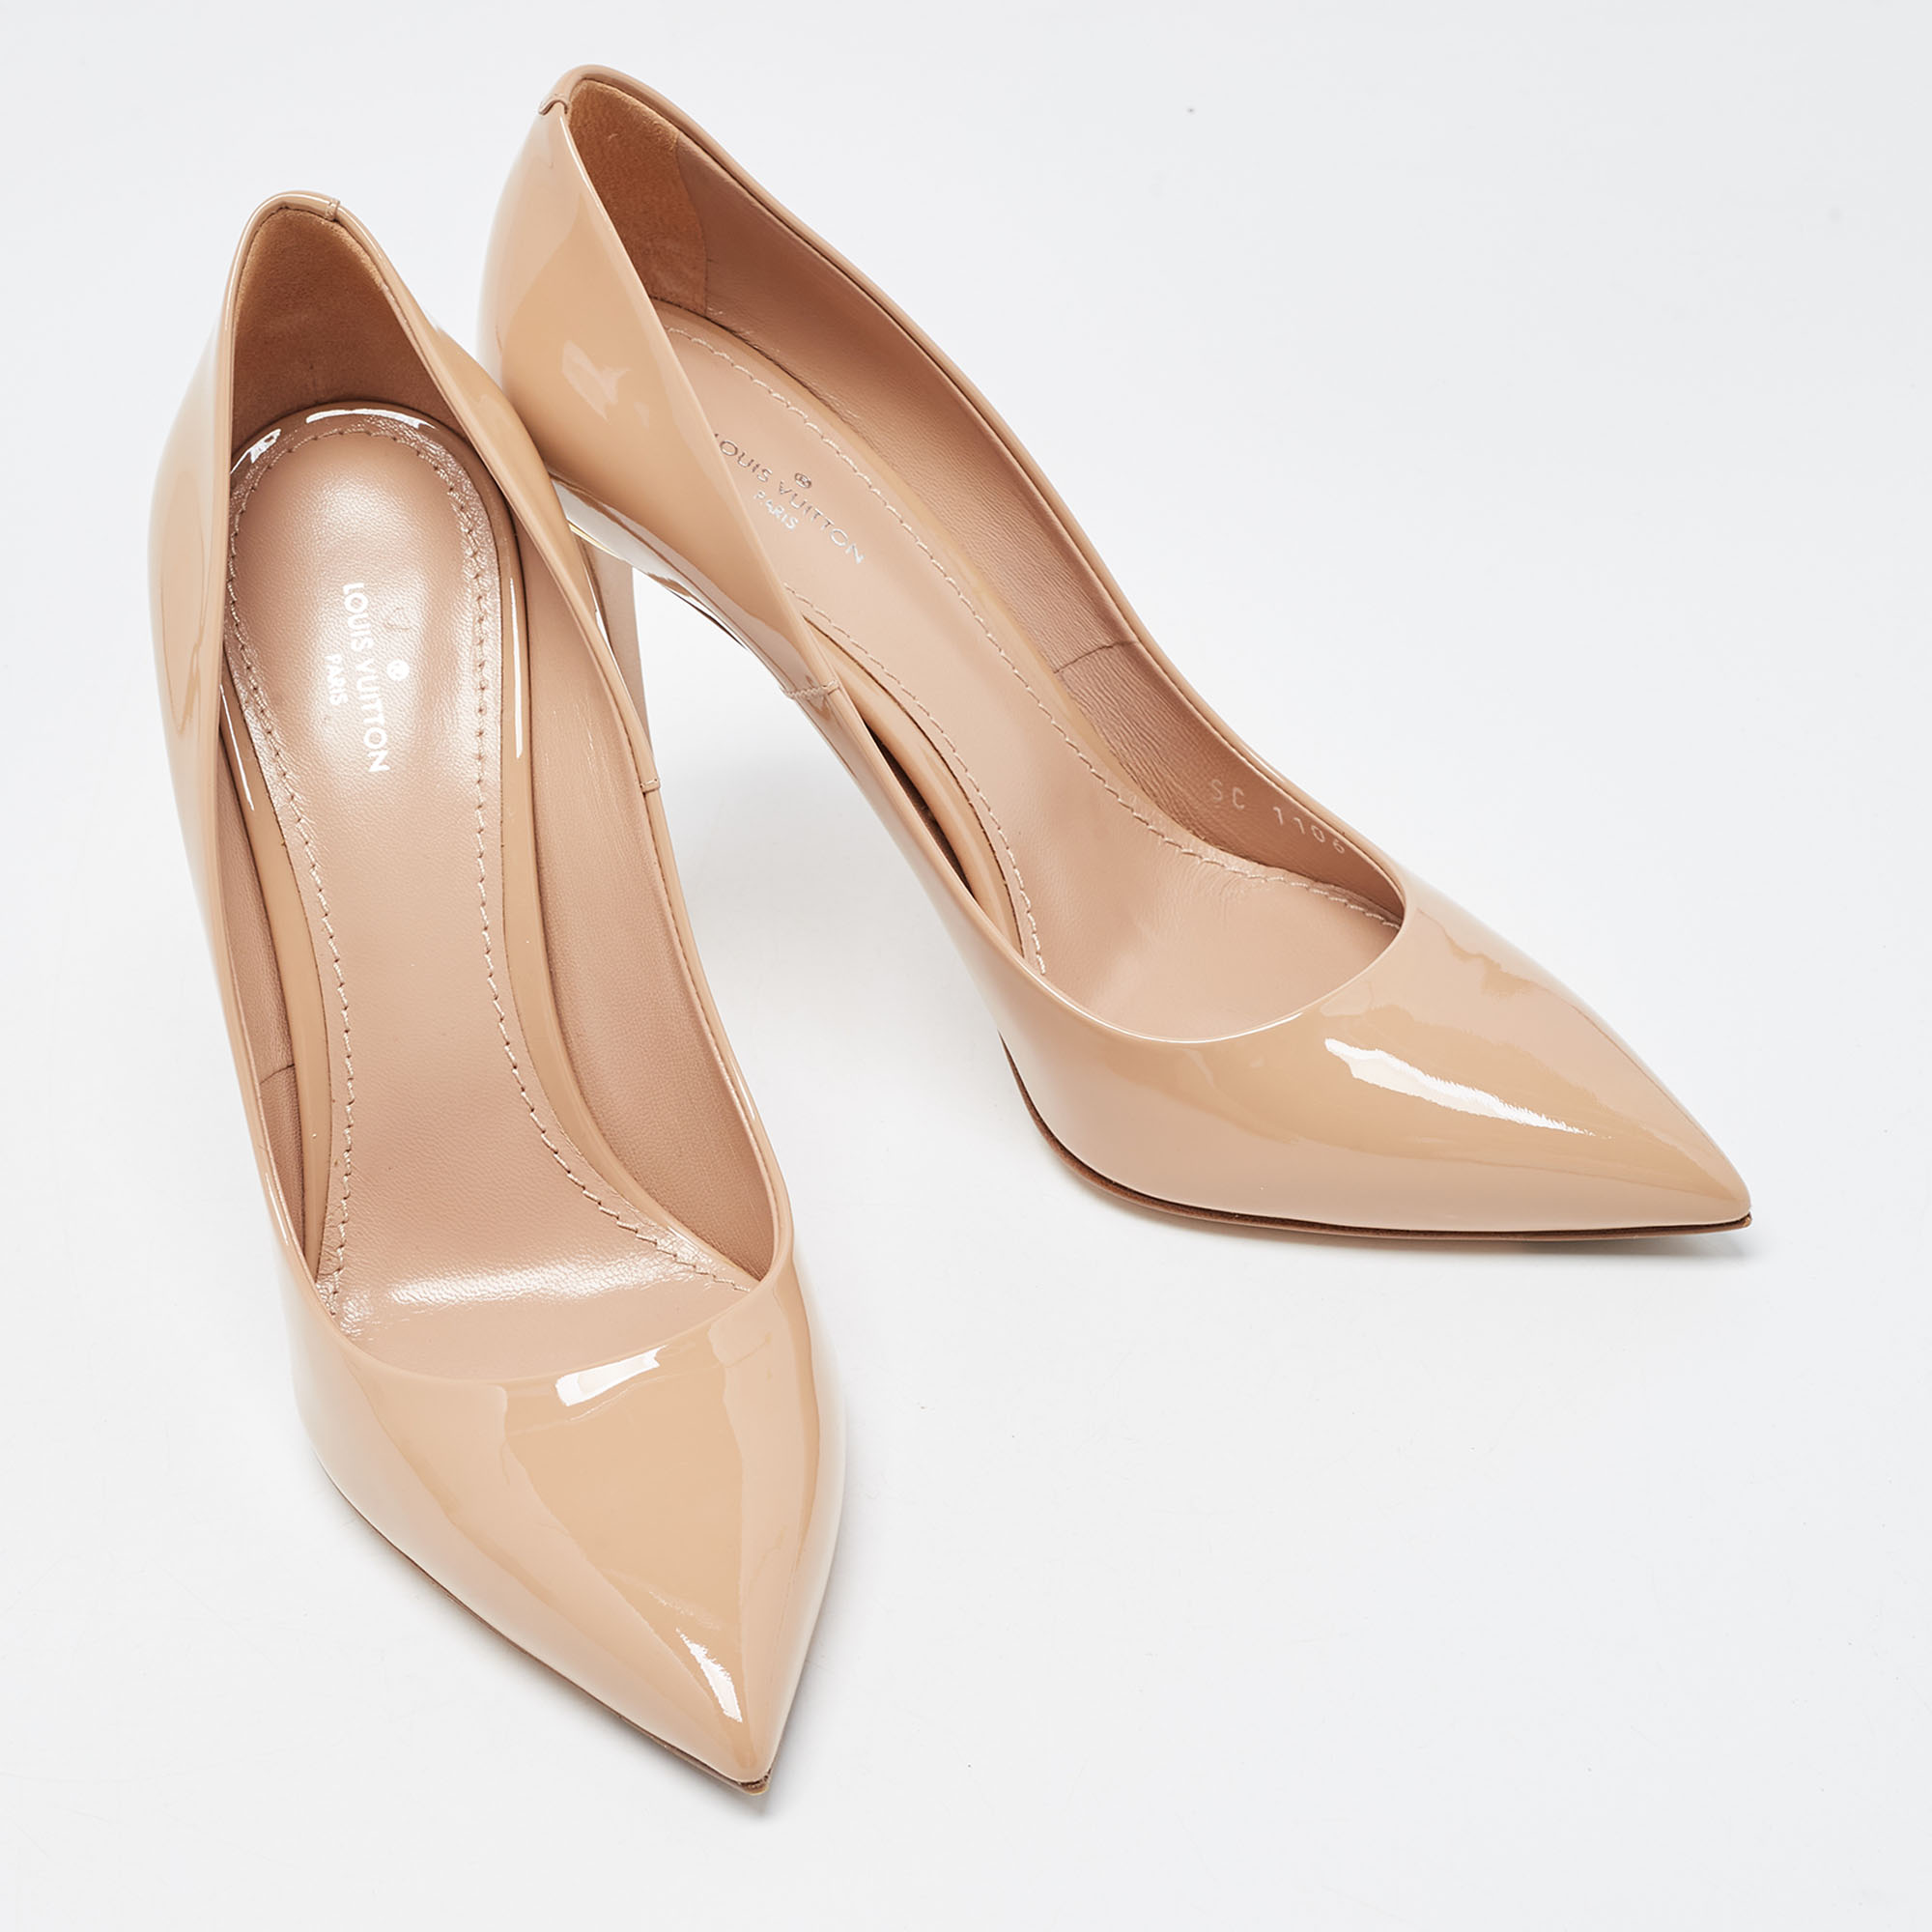 Louis Vuitton Beige Patent Leather Eyeline Pointed Toe Pumps Size 38.5